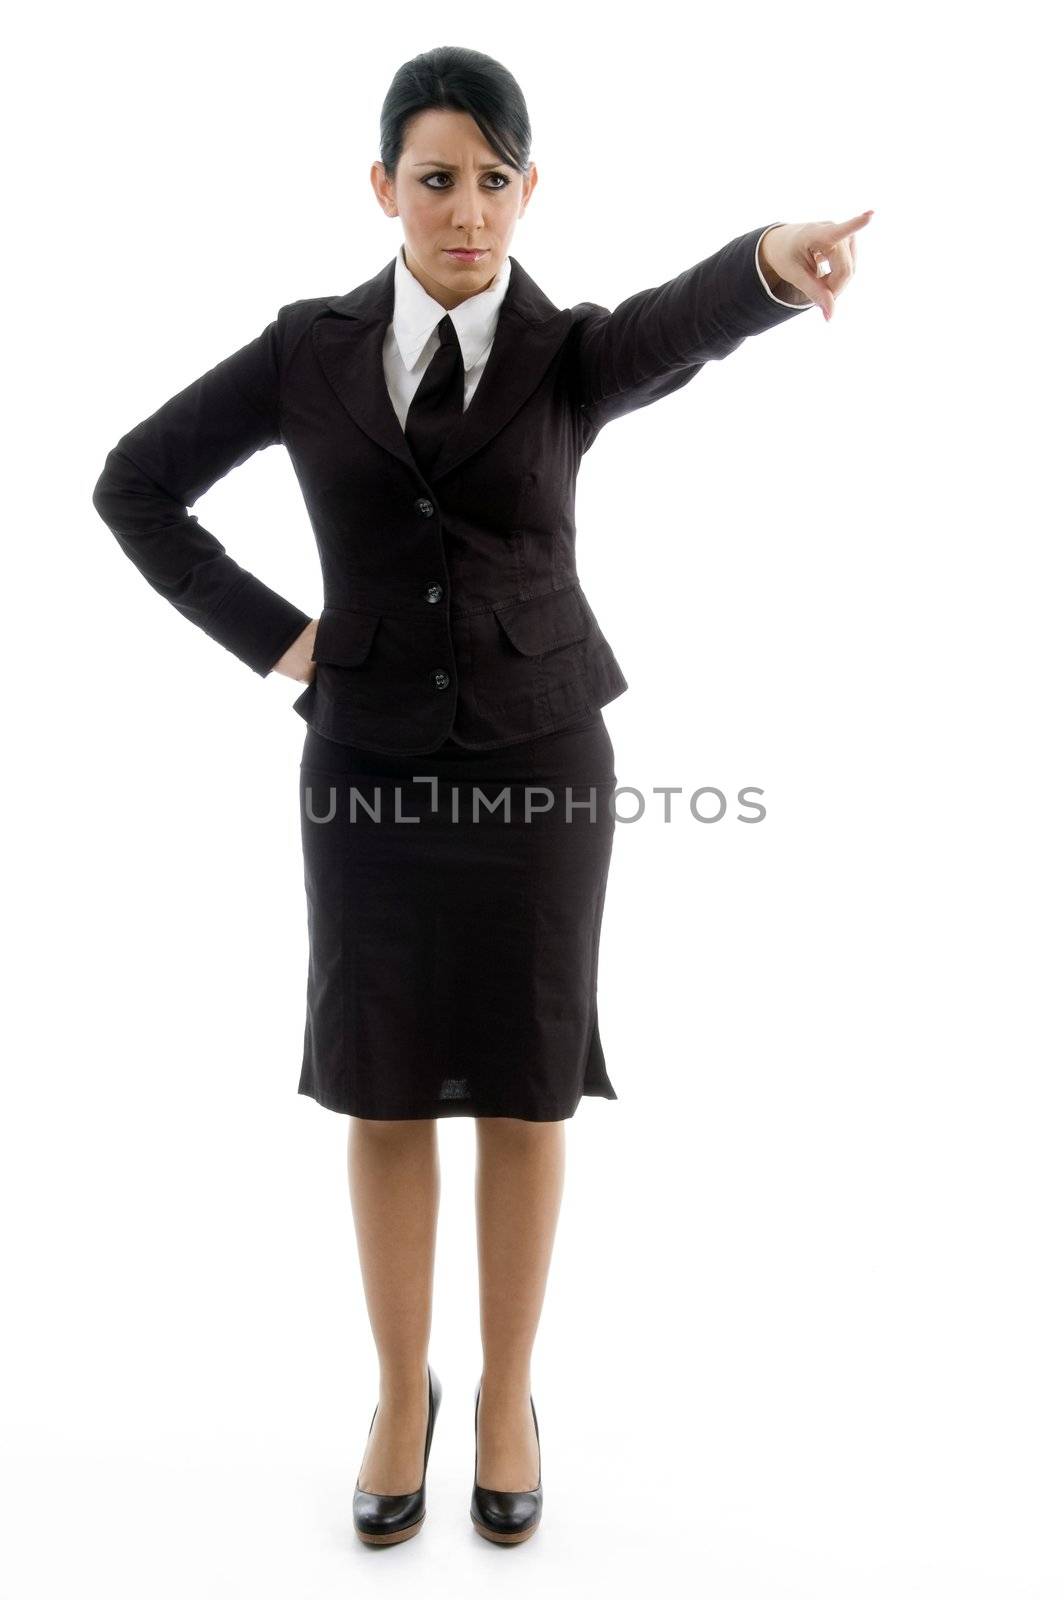 lawyer pointing aside against white background